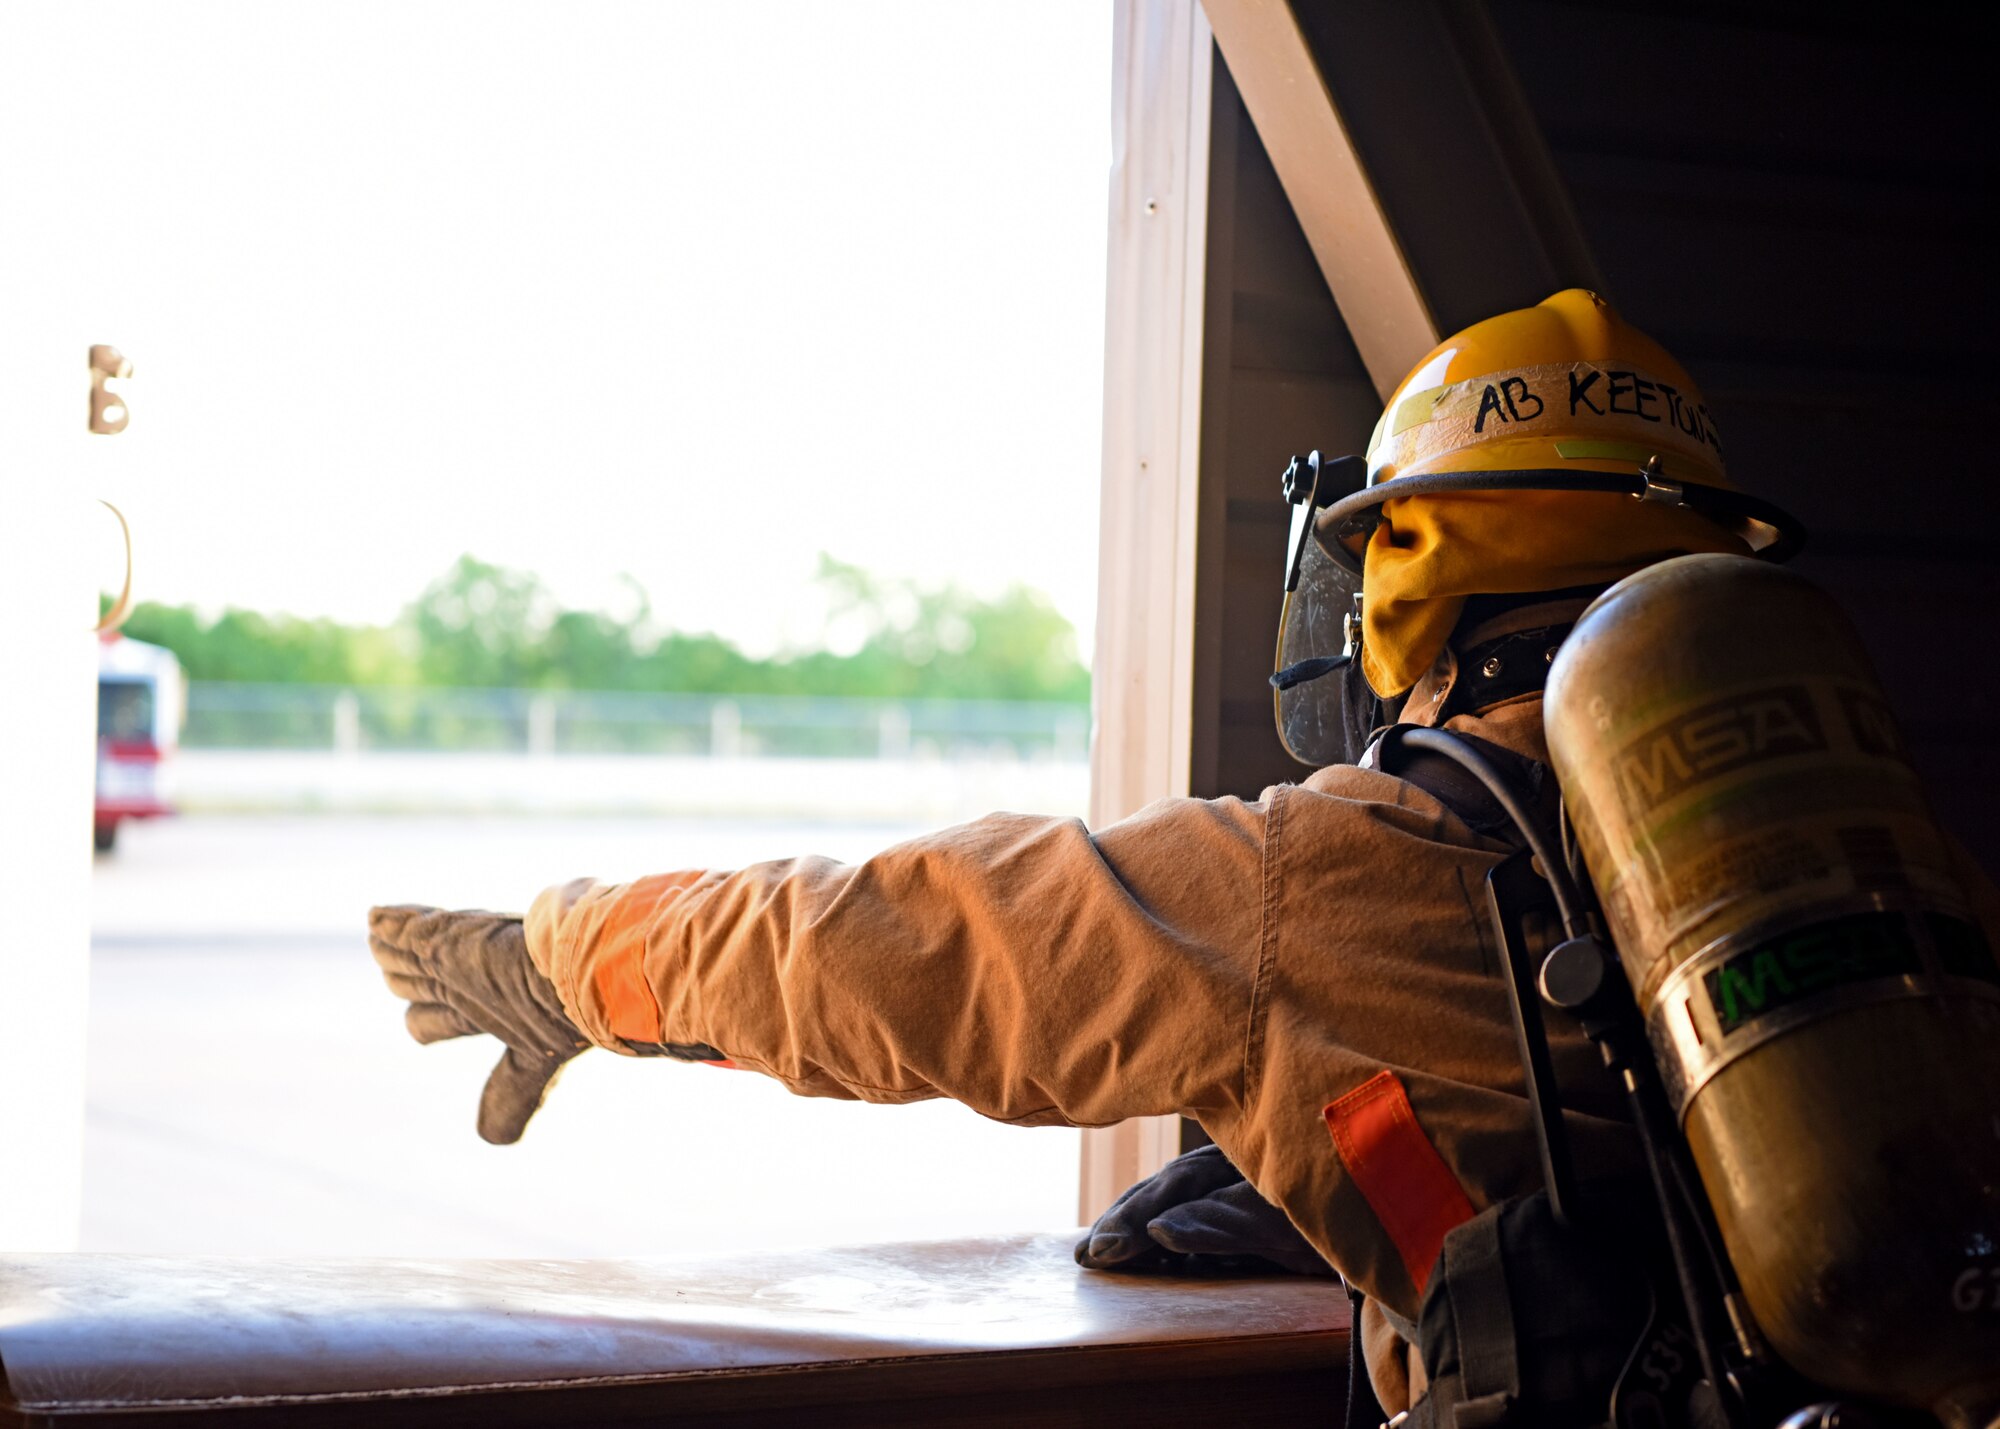 A 312th Training Squadron student pushes open a window to ventilate a building at the Louis F. Garland Department of Defense Fire Academy on Goodfellow Air Force Base, Texas, May 7, 2020. The rescue team was fitted with blindfolds to simulate smoke, they were then sent in to ventilate the building to dissipate the simulated smoke. (U.S. Air Force photo by Airman 1st Class Ethan Sherwood)